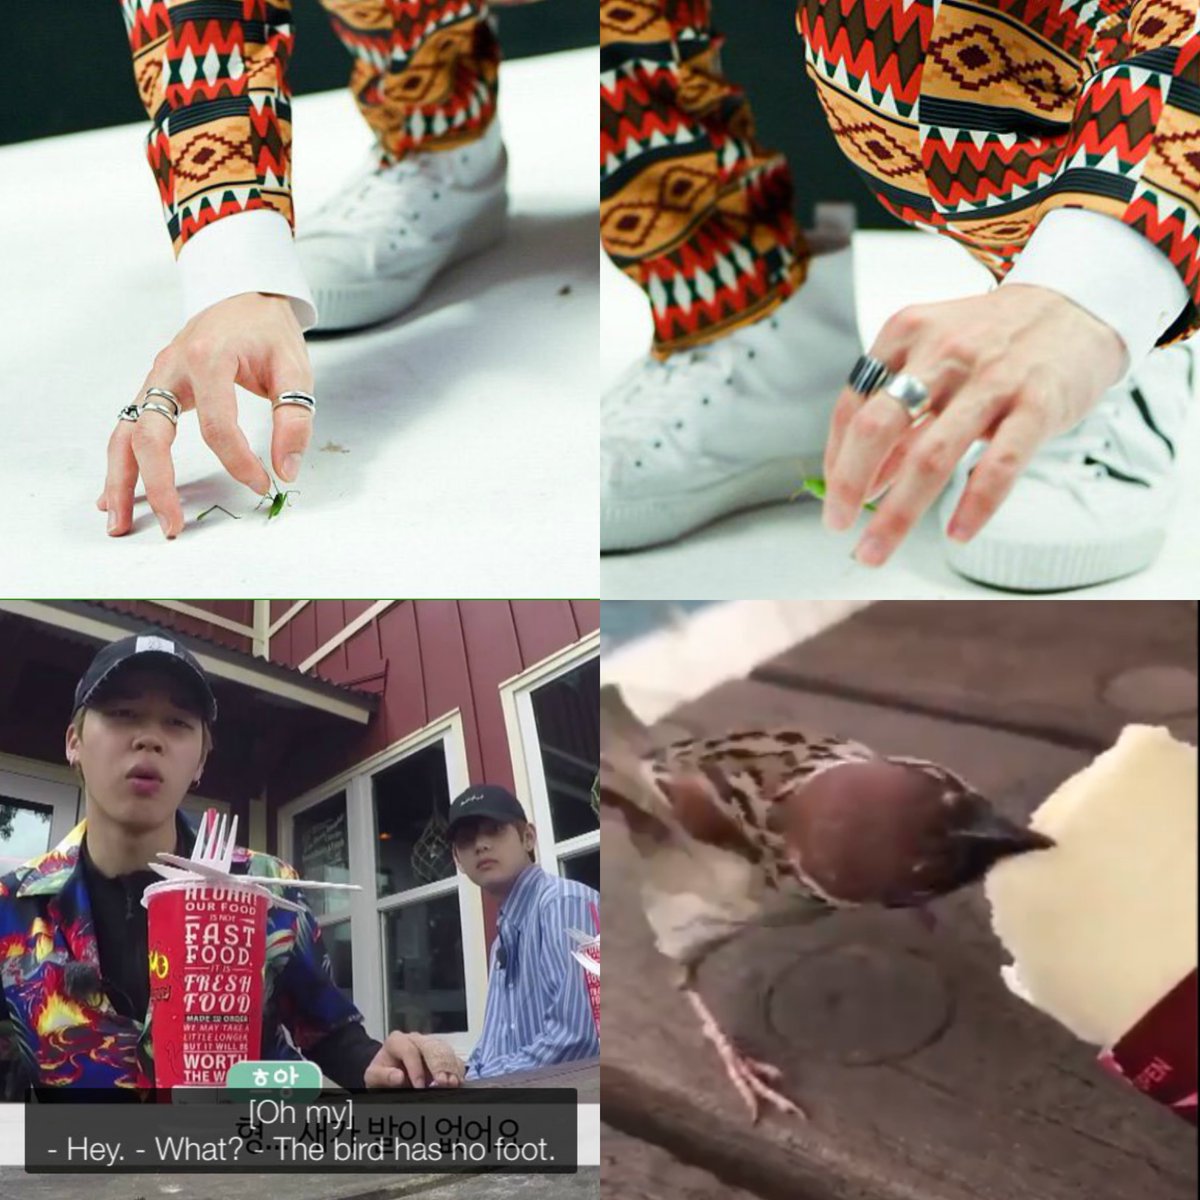  #jimtober D4: Jimin has a heart of gold, even when it comes to caring about small animals or insects. He carried a hurt grasshopper out of the set, felt bad seeing a bird with no foot, fed birds his ice cream, and posted tweets calling a tiny gecko a "baby" among other things